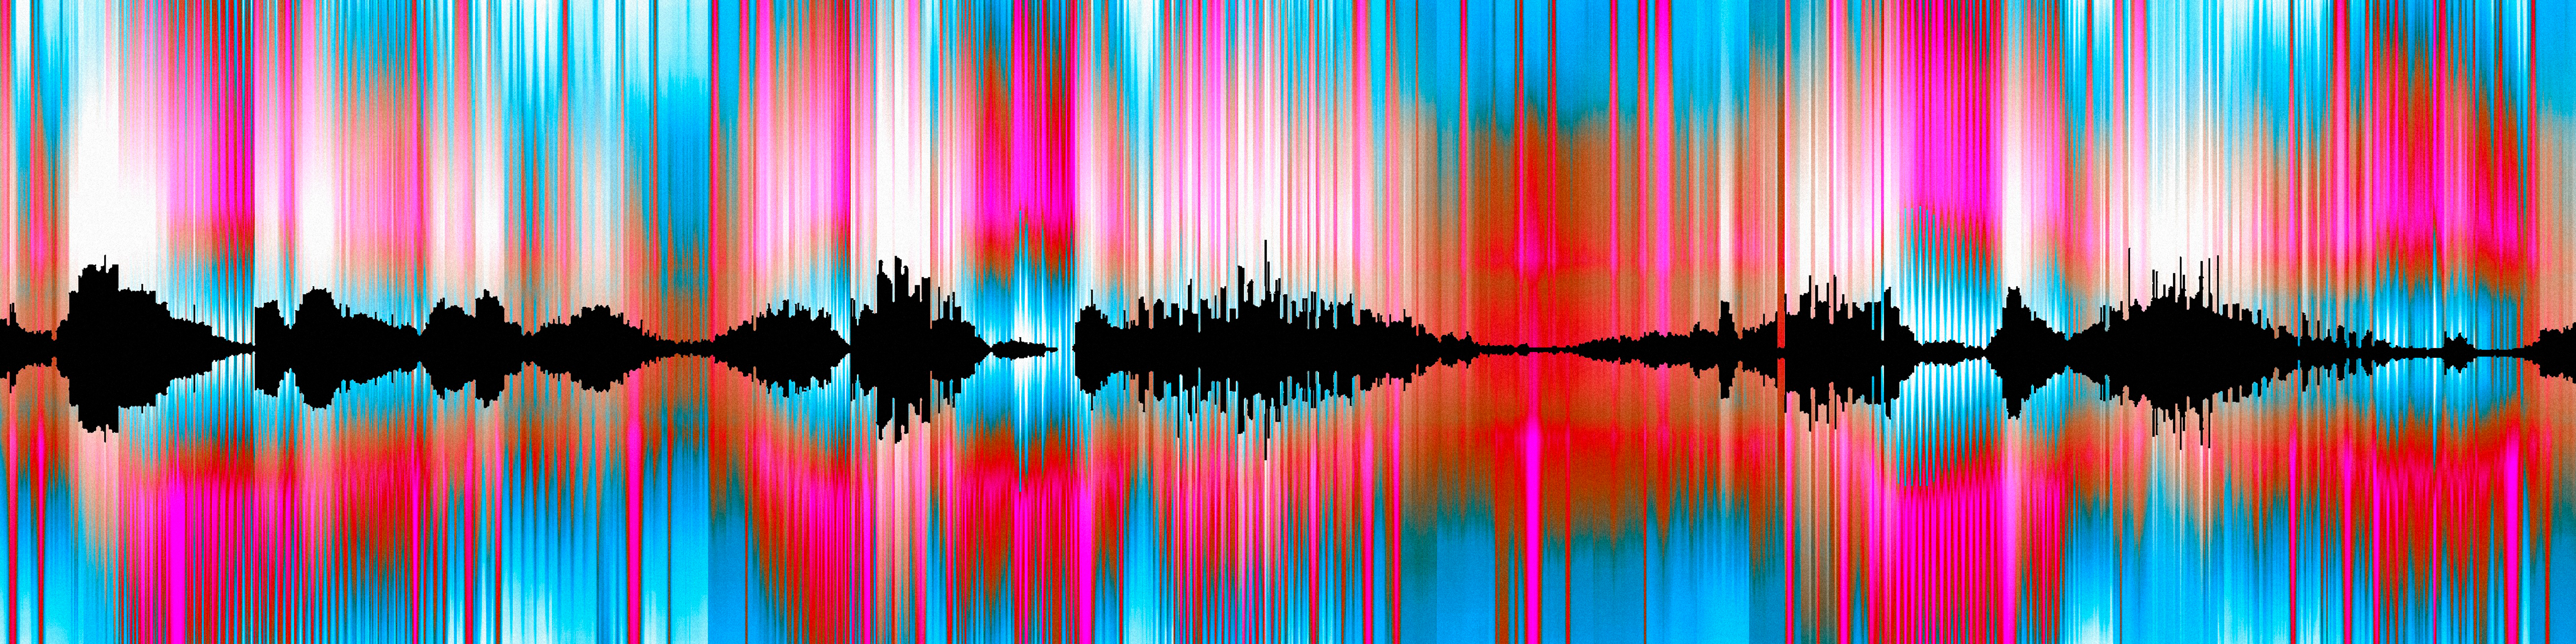 Abstract sound waves, illustration